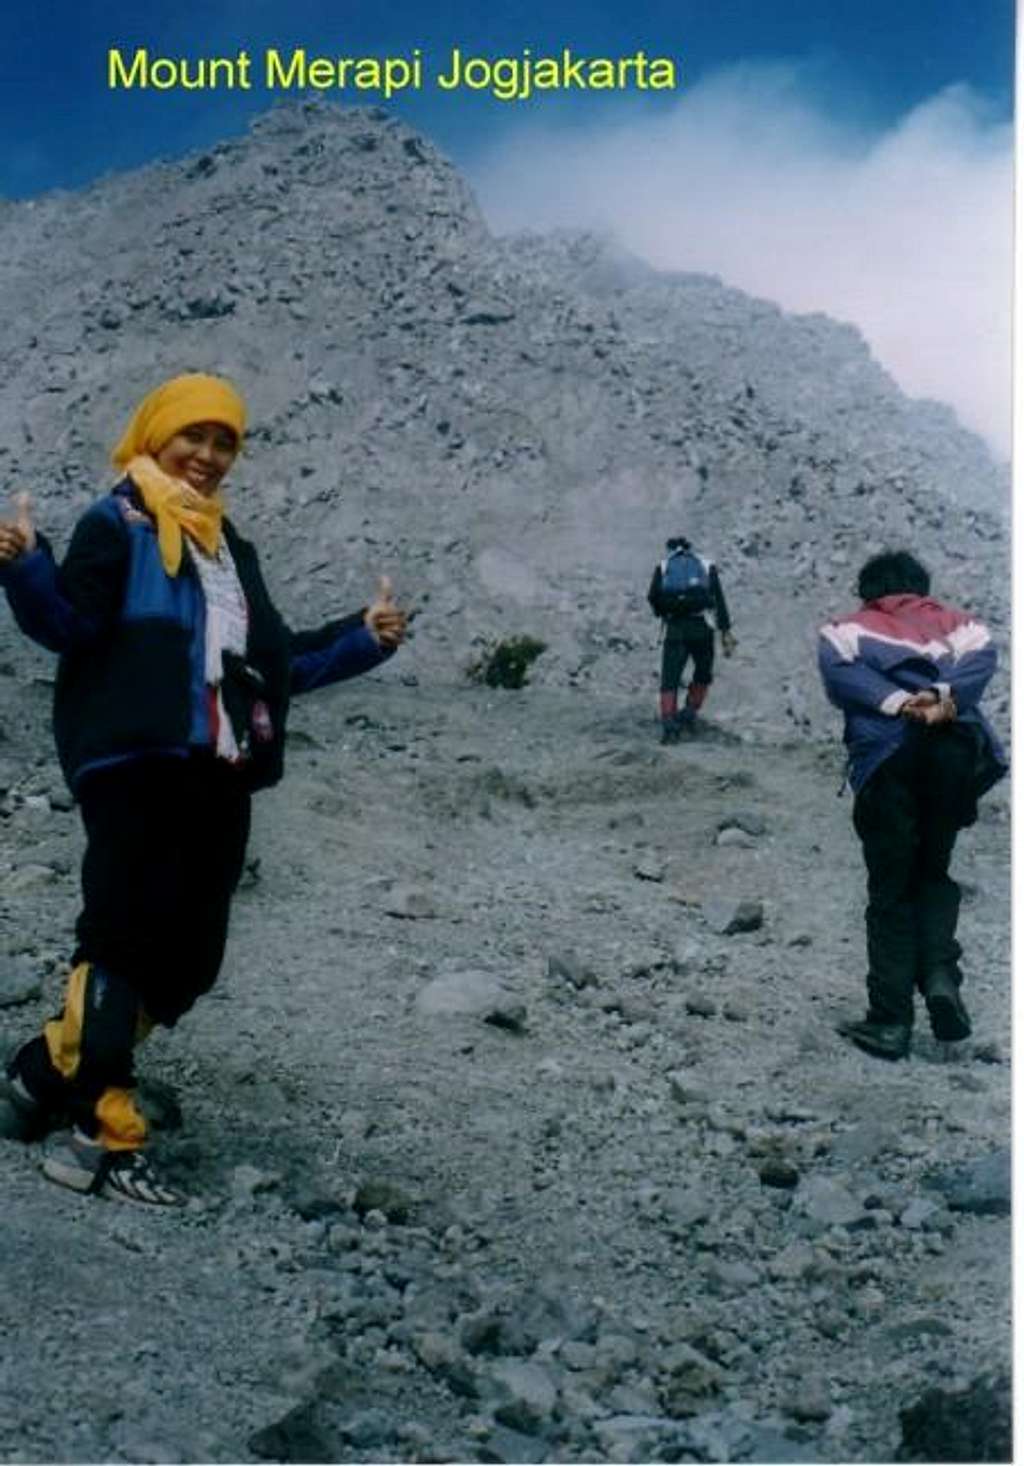 to the summit of Mount Merapi